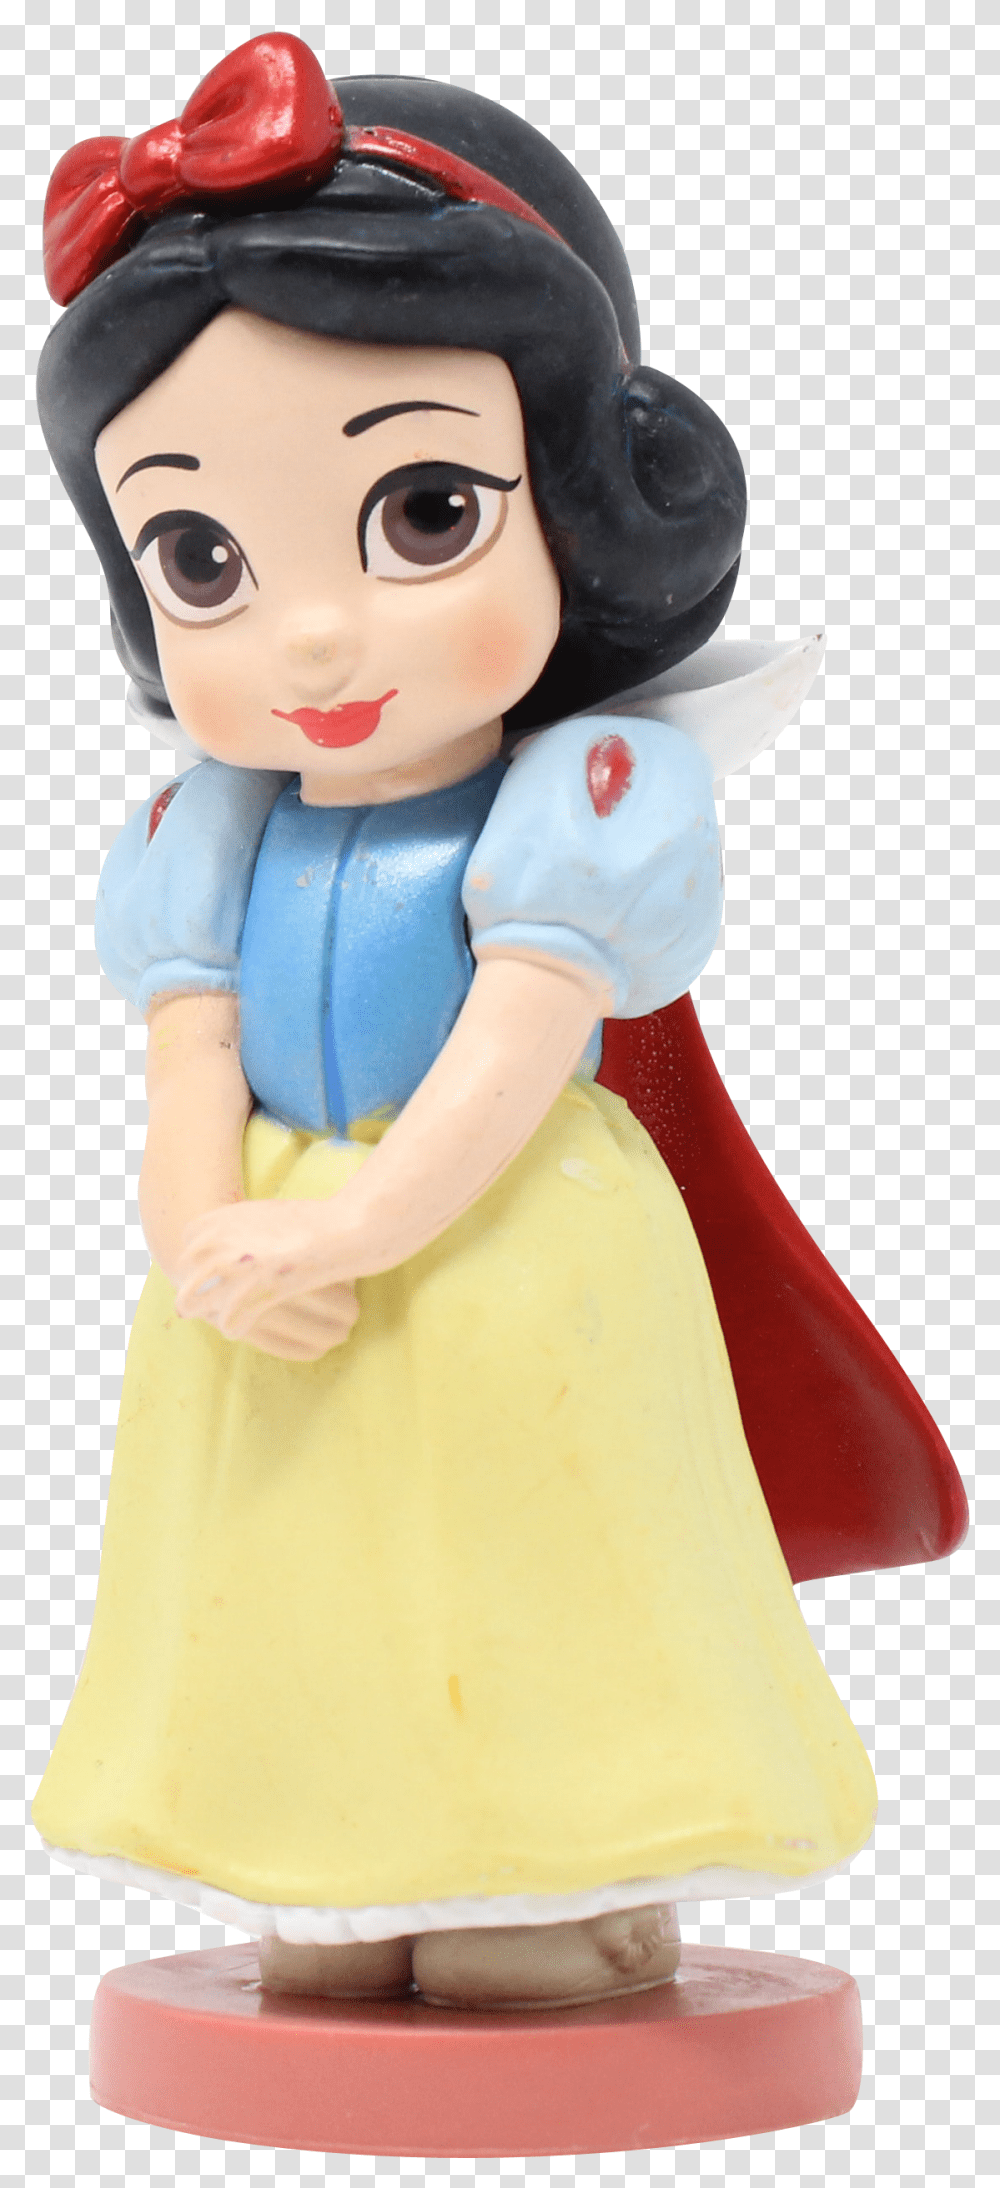 Snow White Toy Background Background Toy, Doll, Figurine, Person Transparent Png